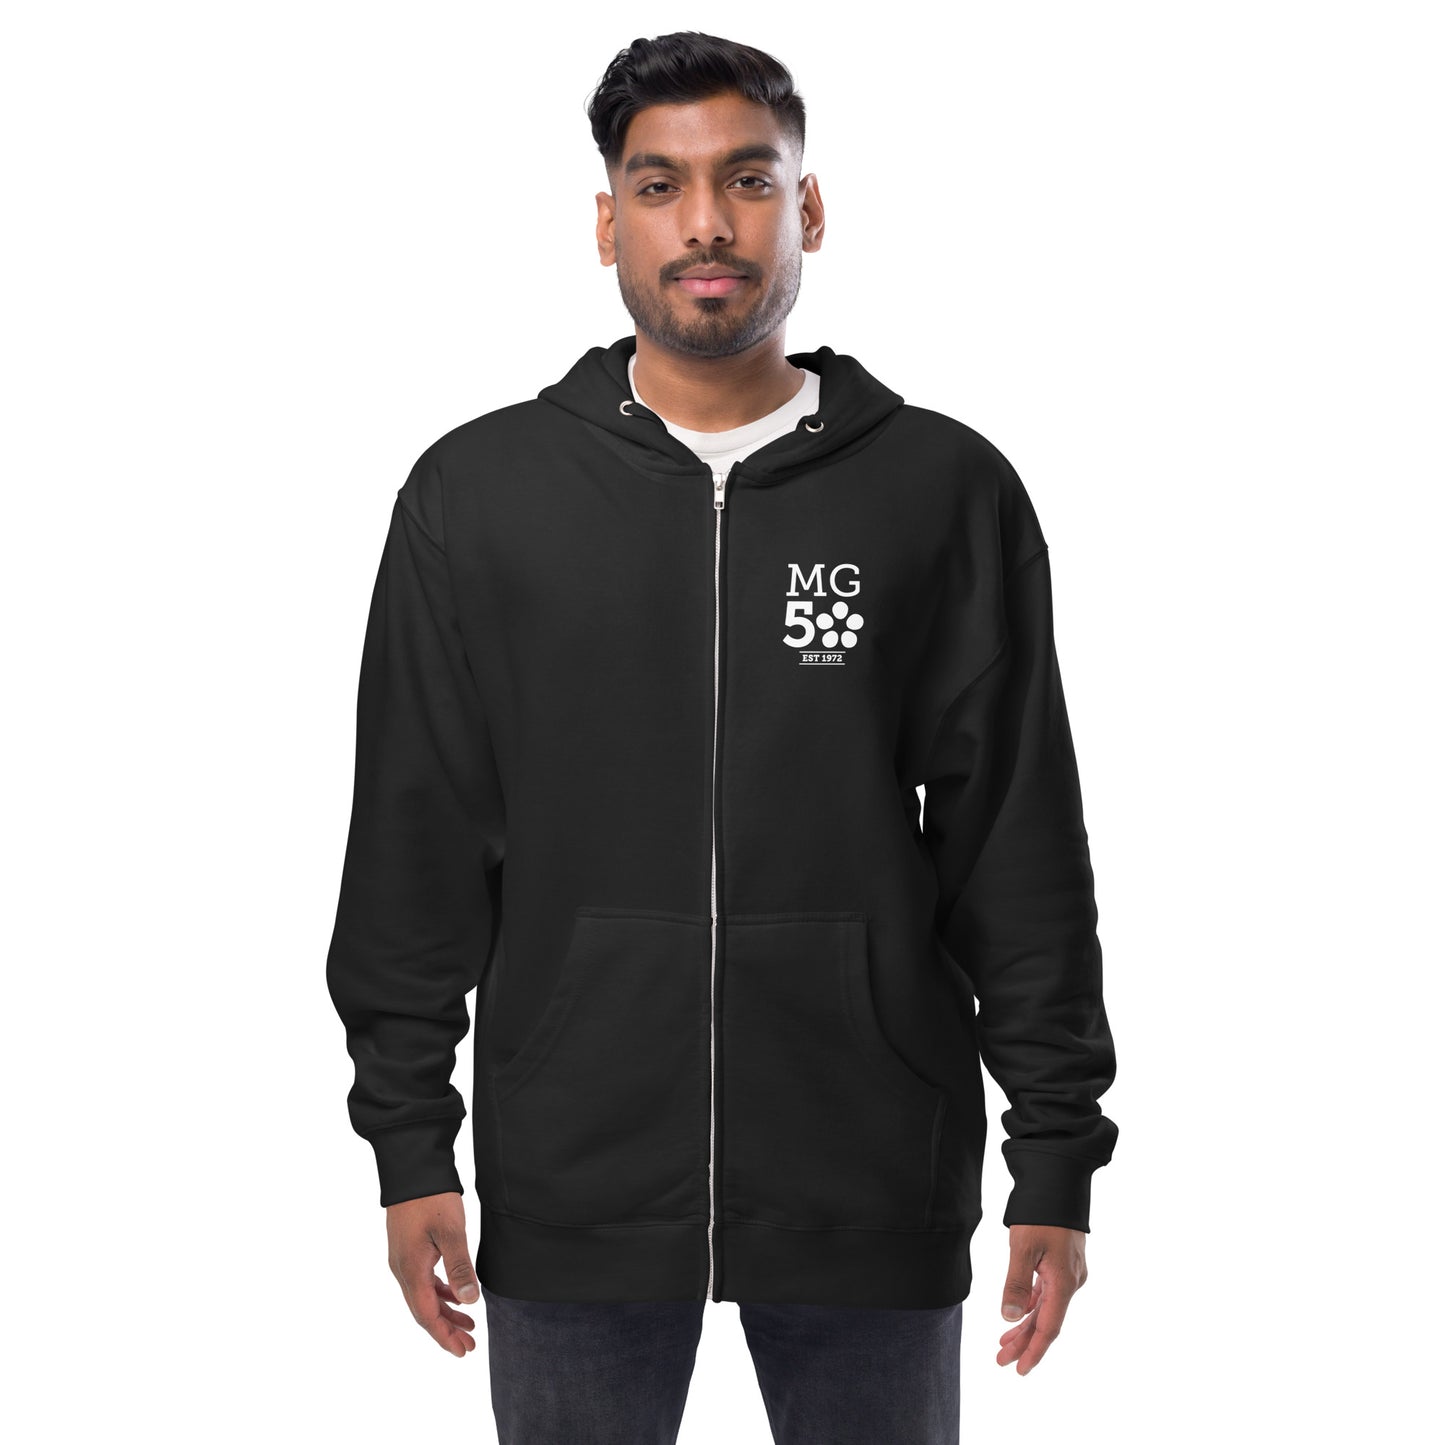 Mission Graduates Unisex Fleece Zip Up Hoodie, Favicon Logo Front Chest with Full Logo Print on Reverse, Available in Three Colors